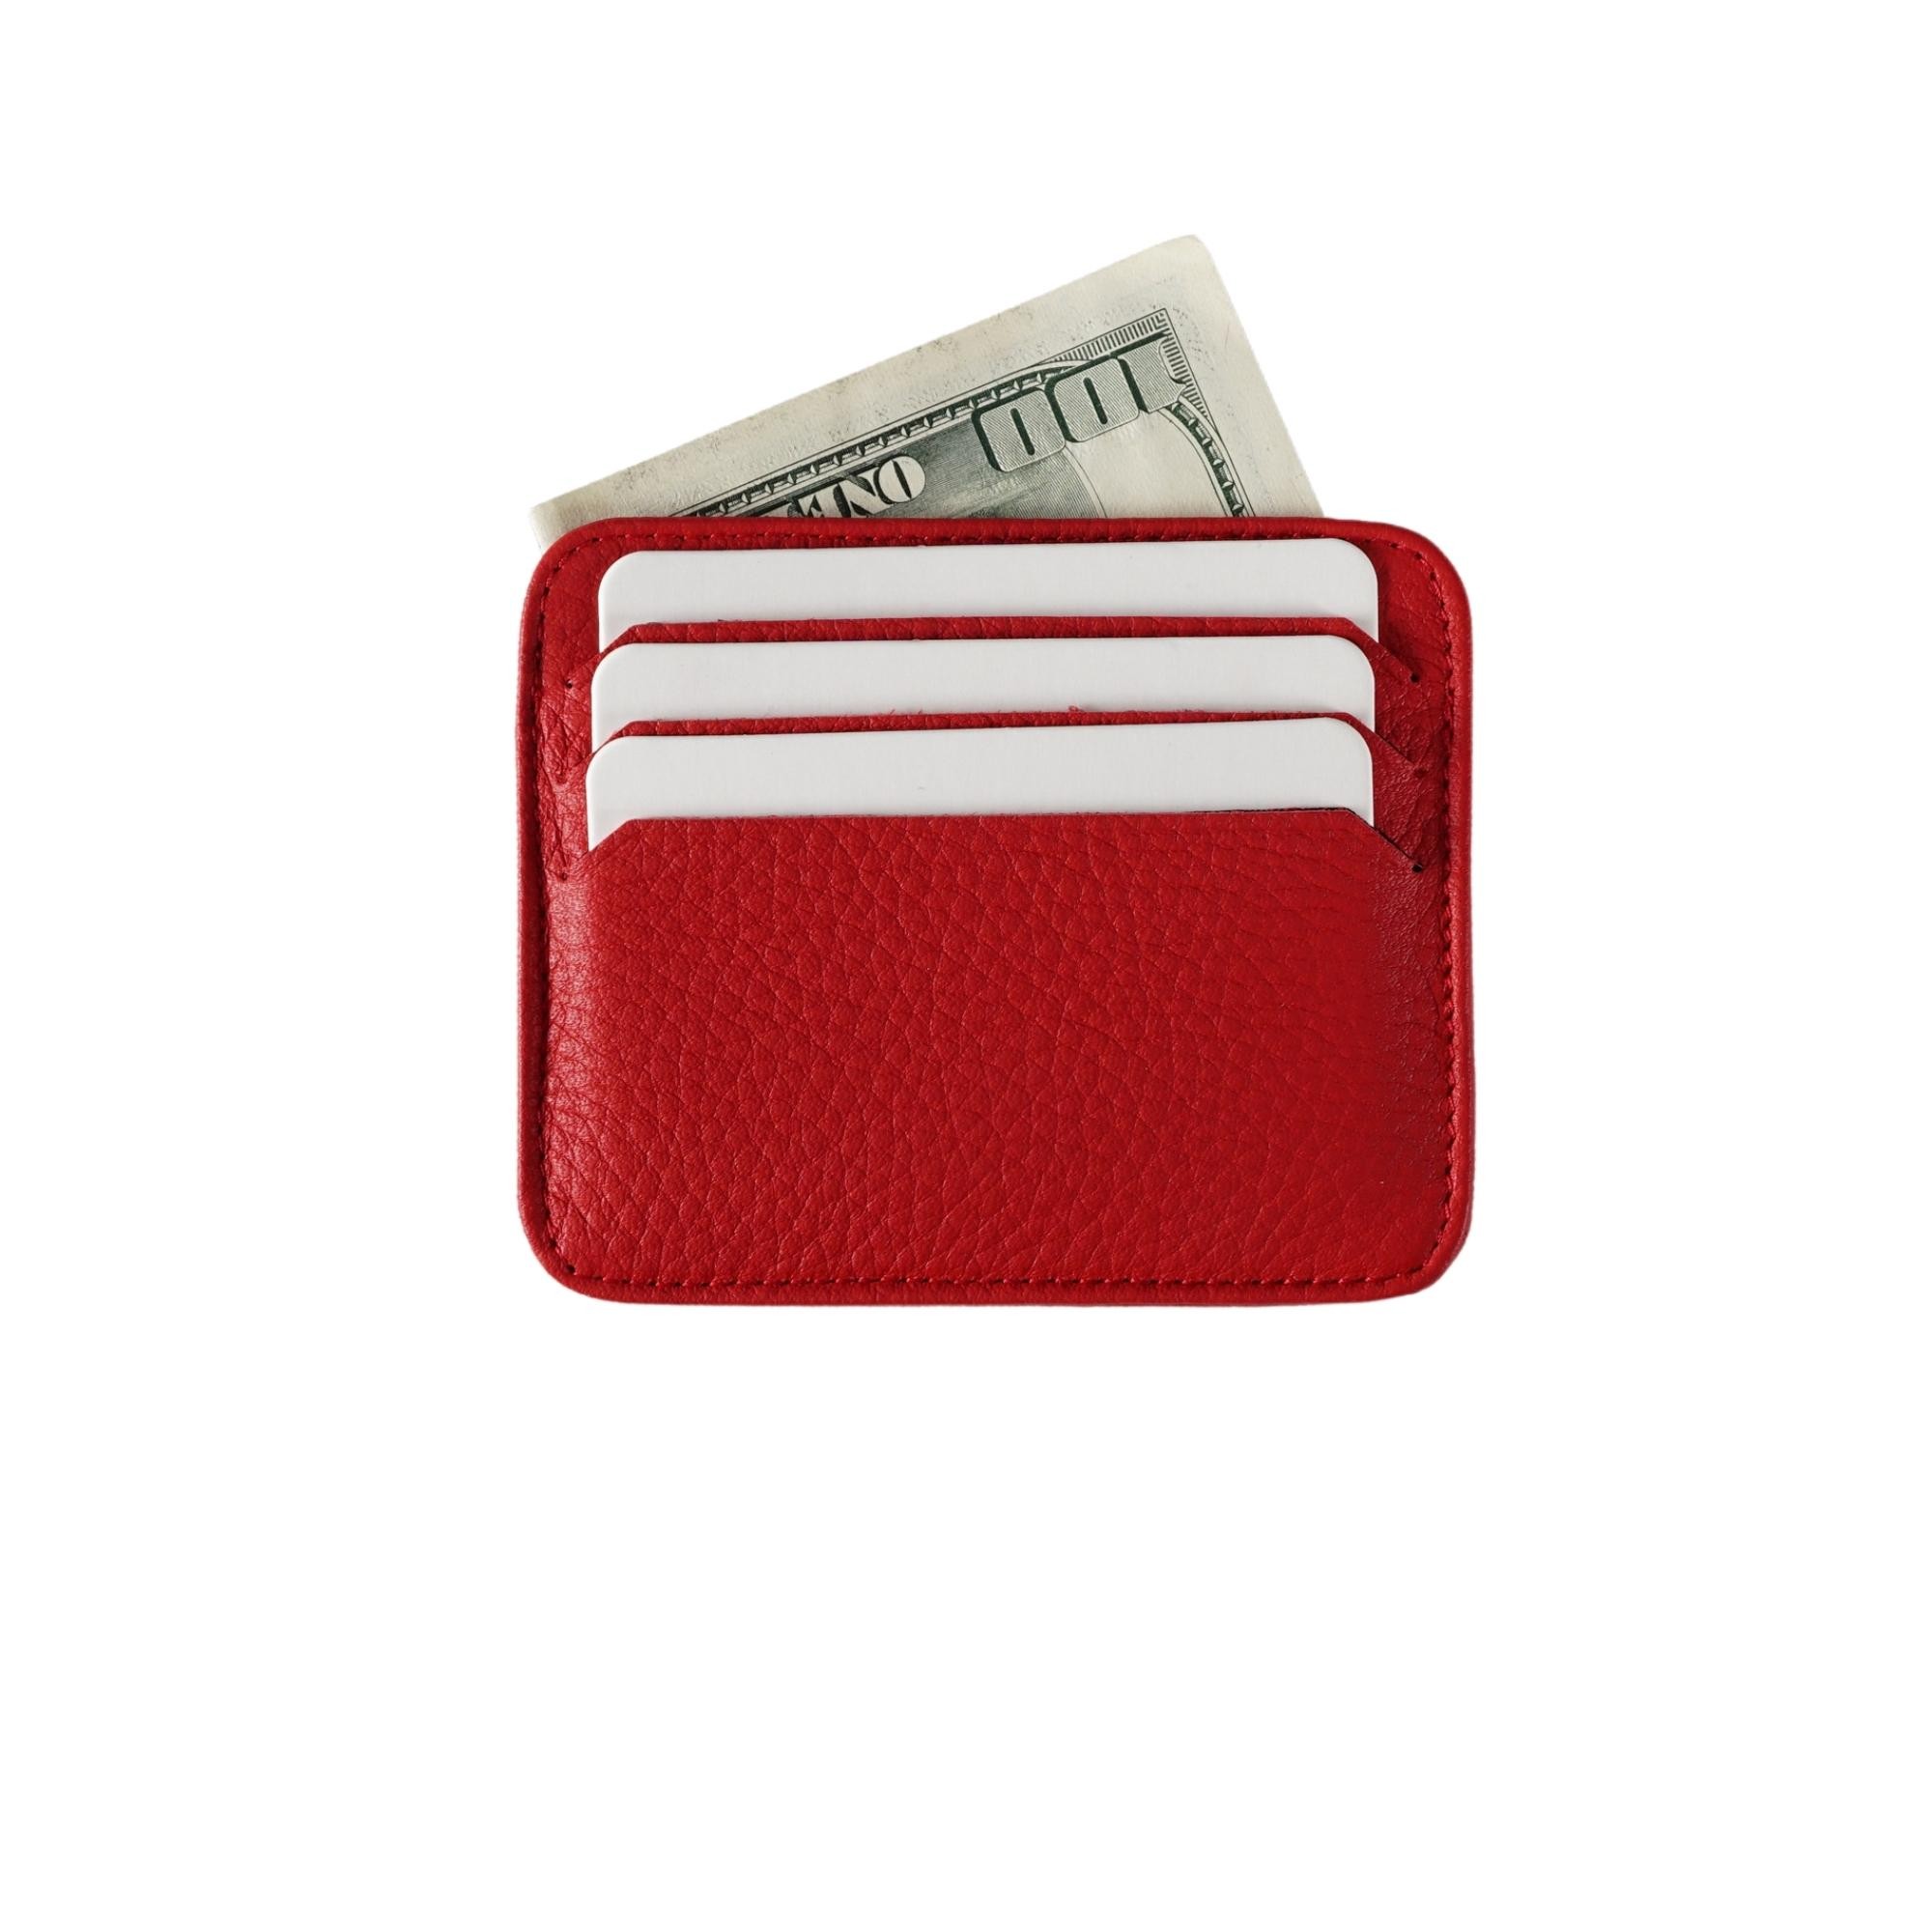 Genuine Leather 6-1 Card Holder  - Red